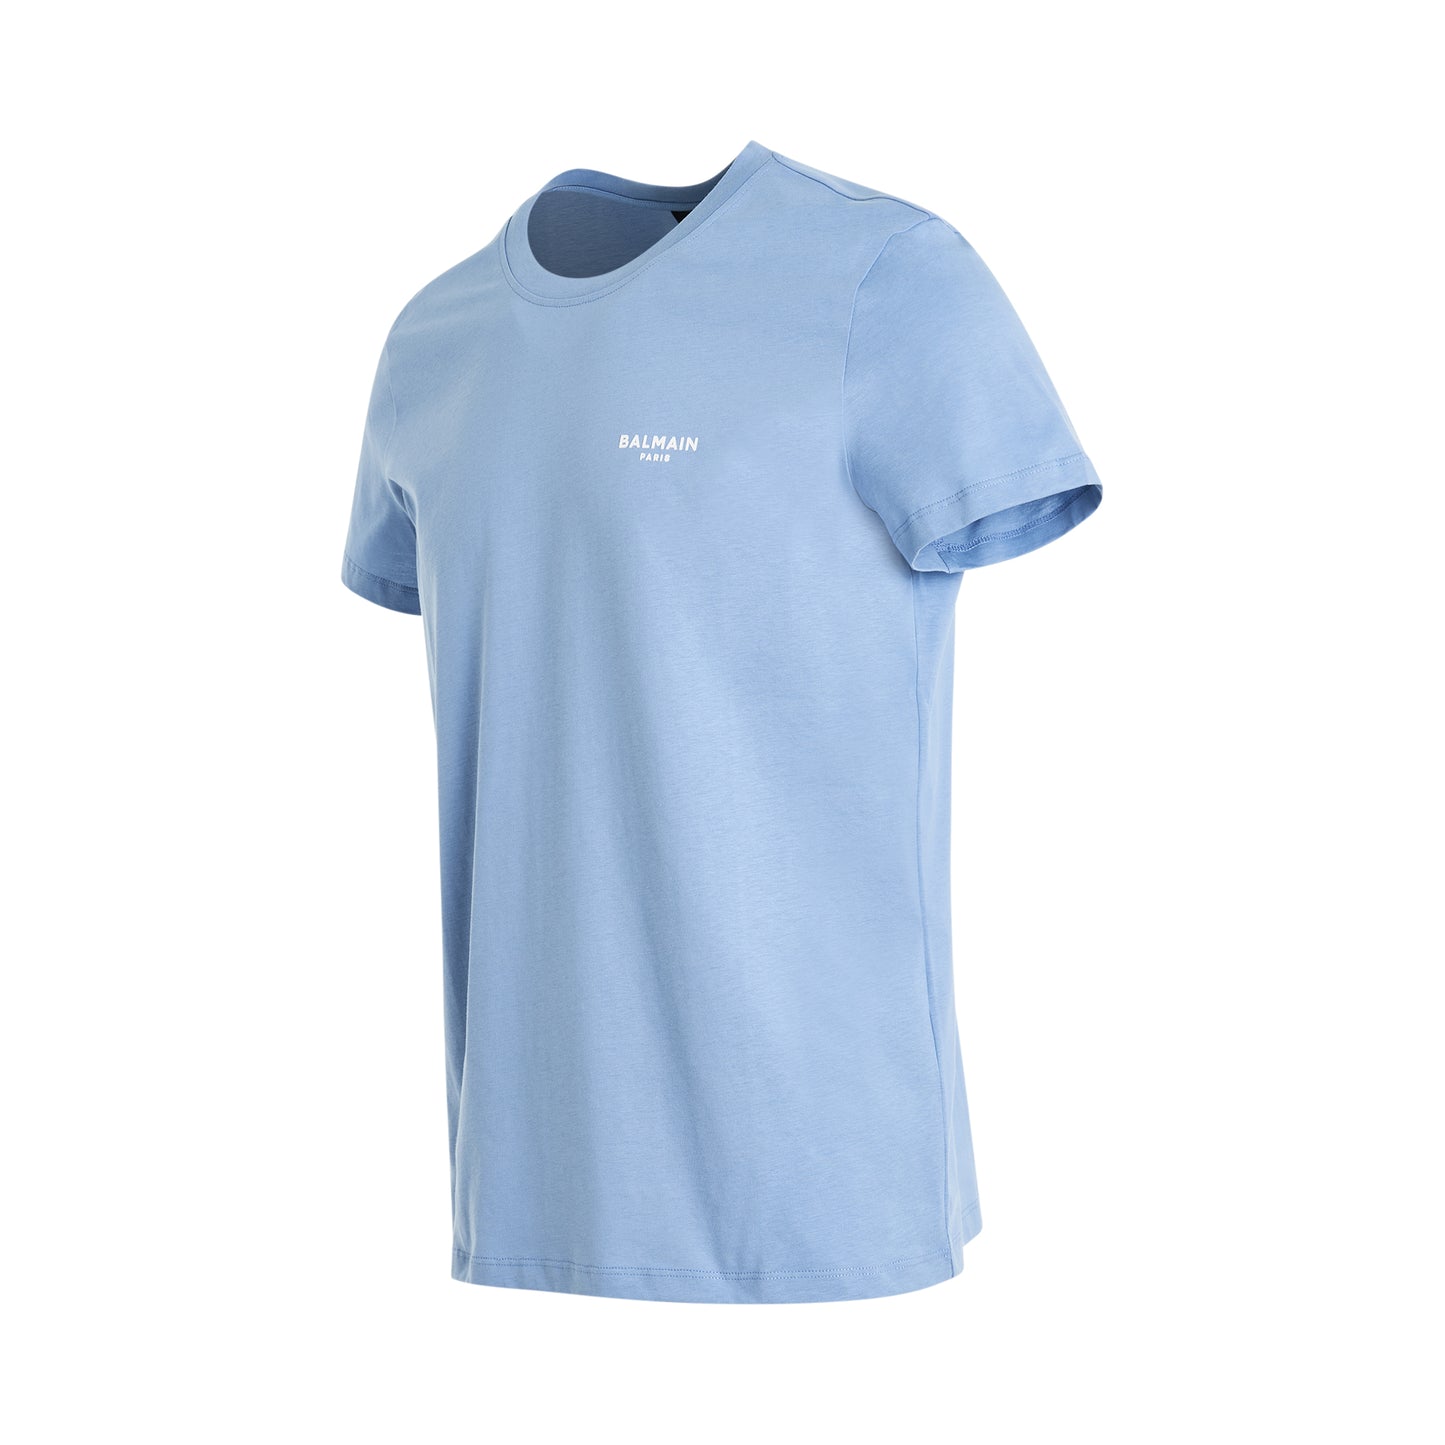 Classic Fit Flock T-Shirt in Blue/White